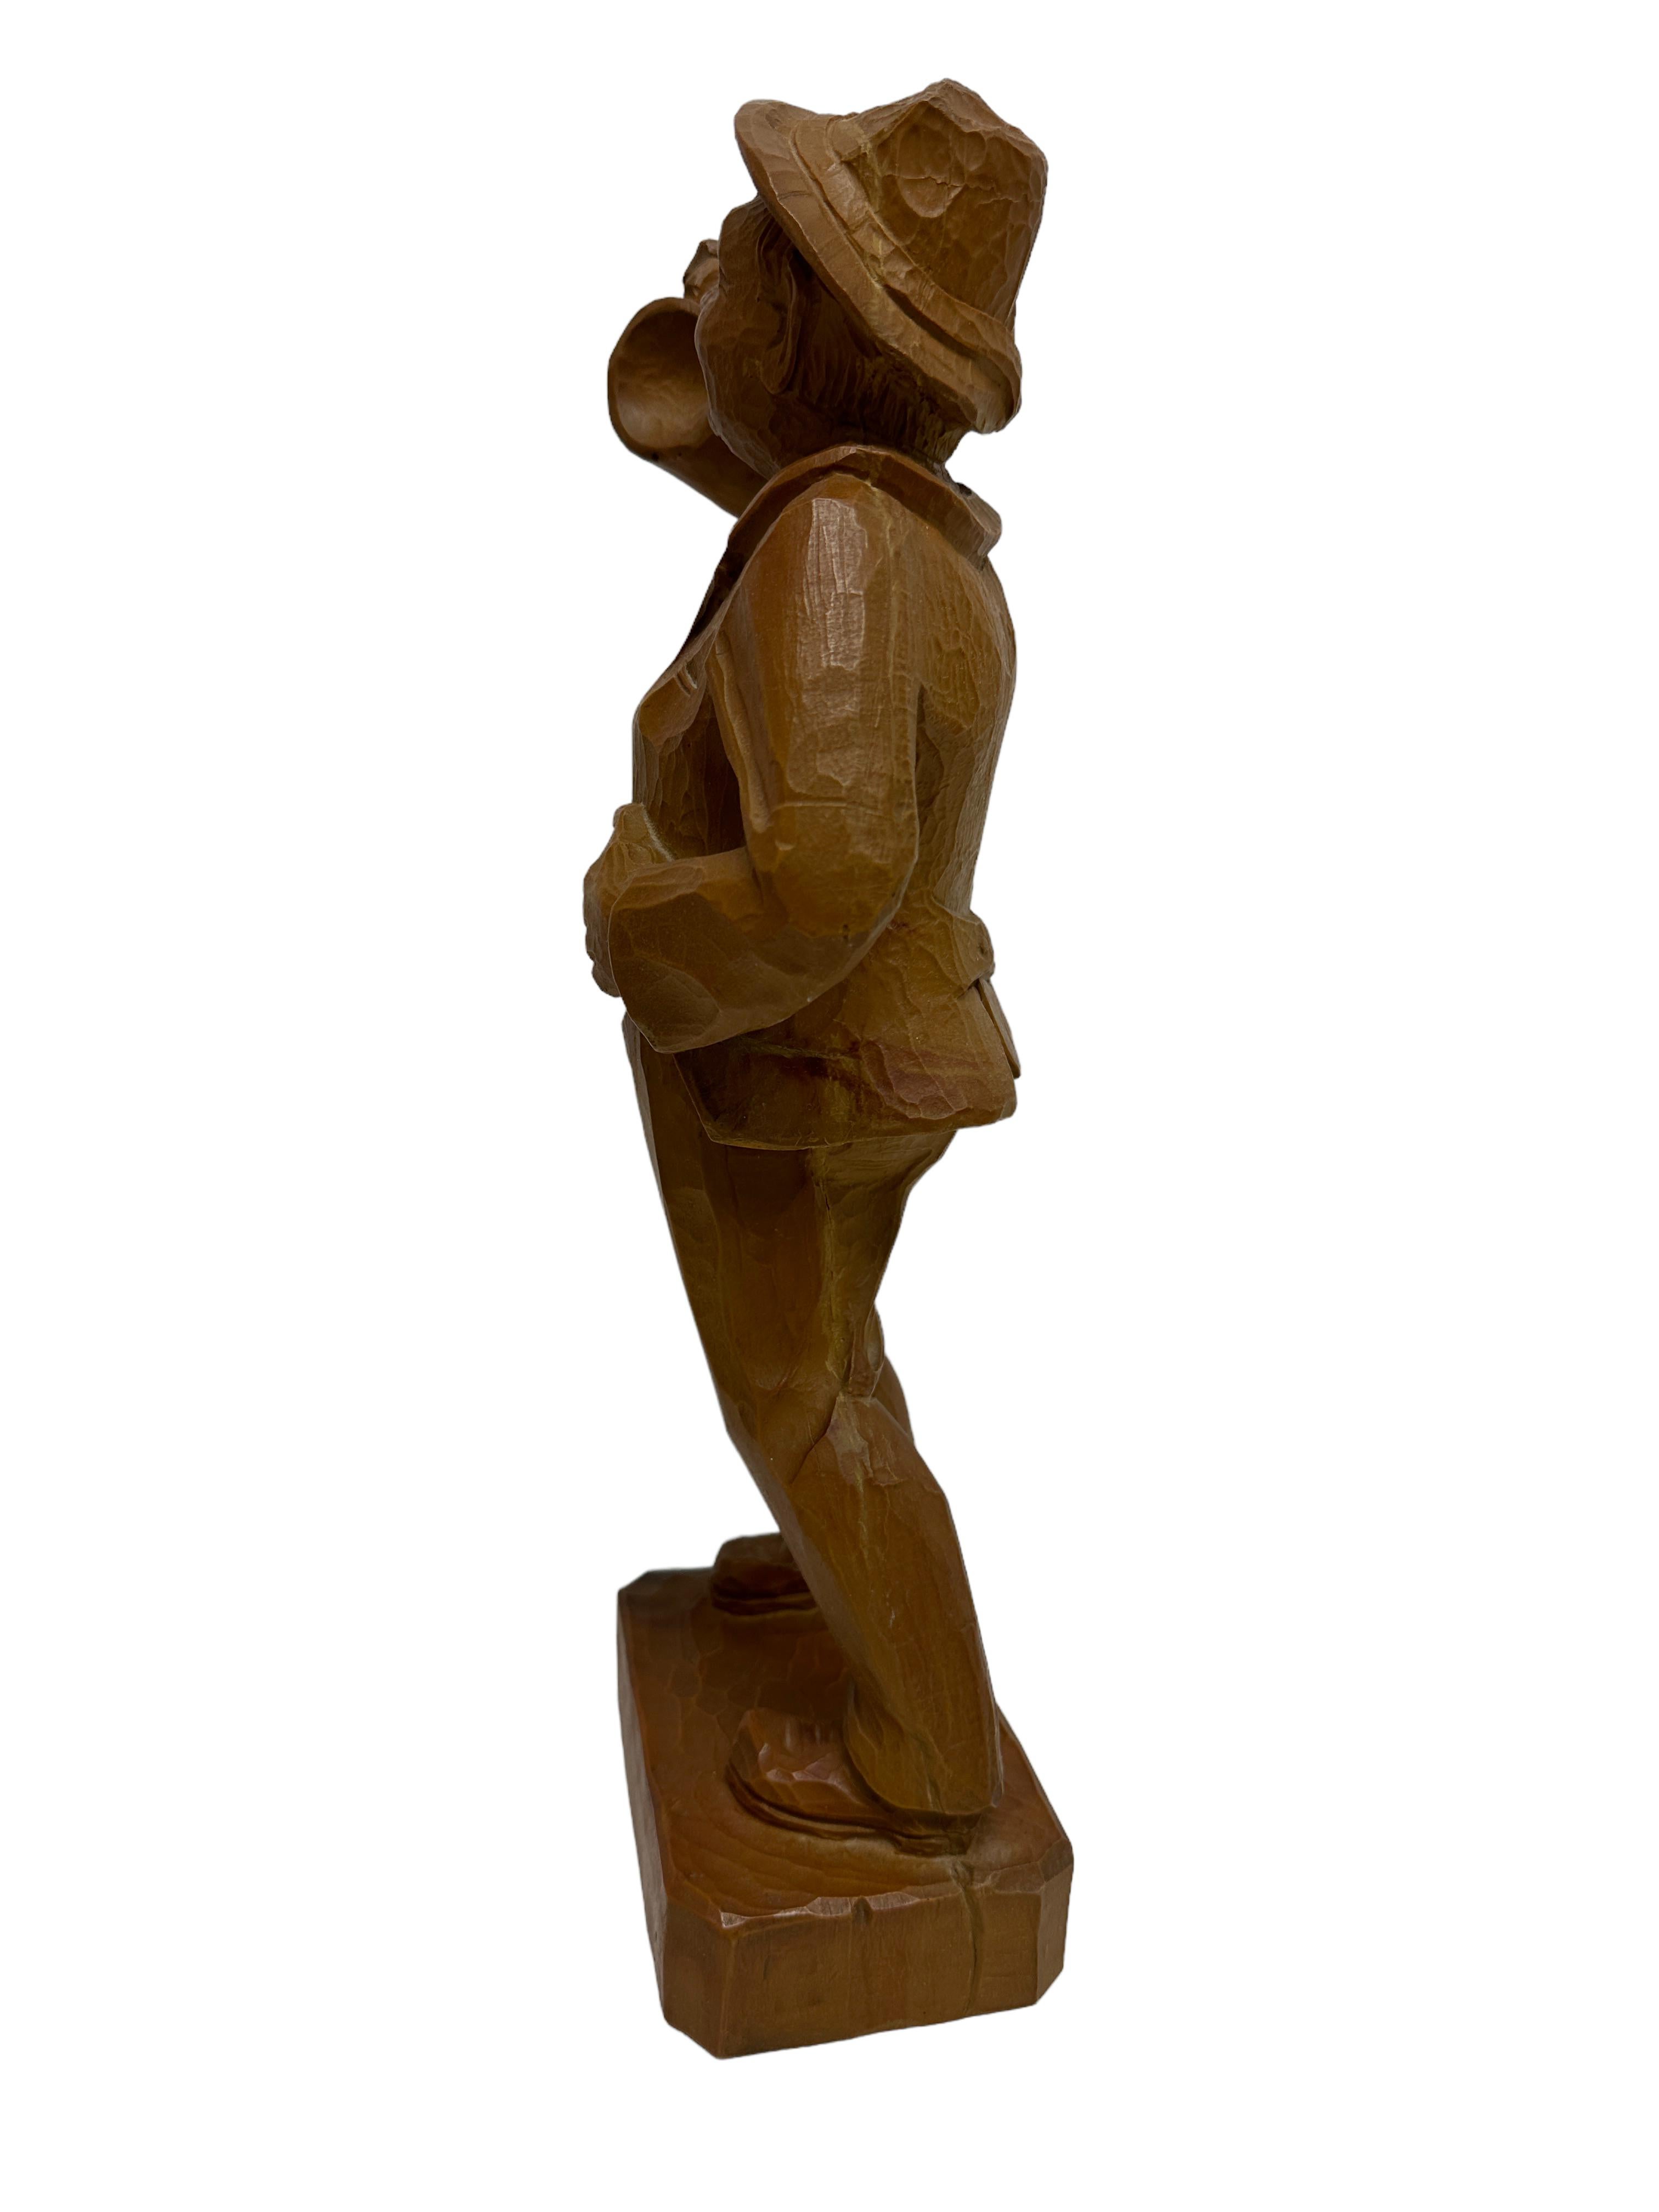 Pine carving of a beer drinking man, 20th century Austria, he is holding his stein in one hand and straightened his jacket with the other. With a manufactory mark at the base. Found at an estate sale in Vienna, Austria. This will look great in every